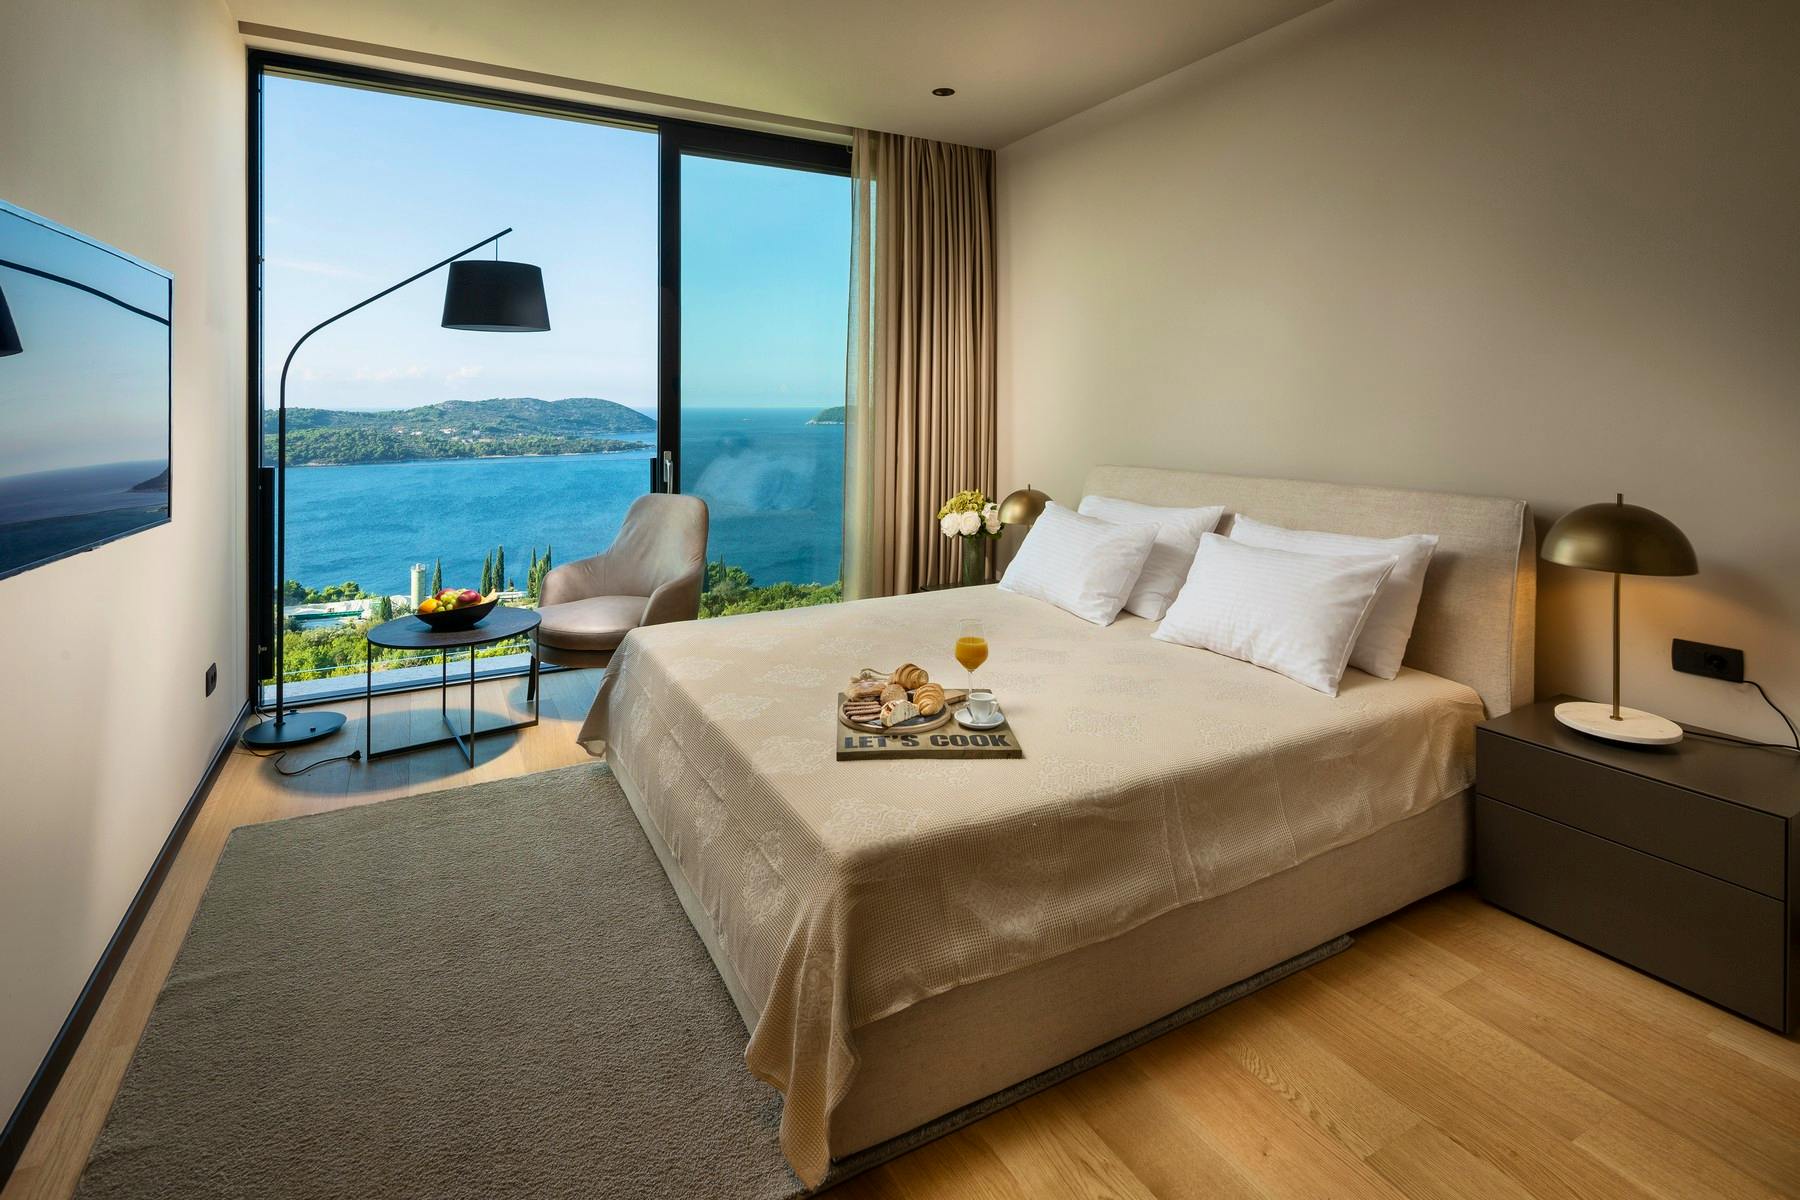 Double bedroom offers stunning sea view